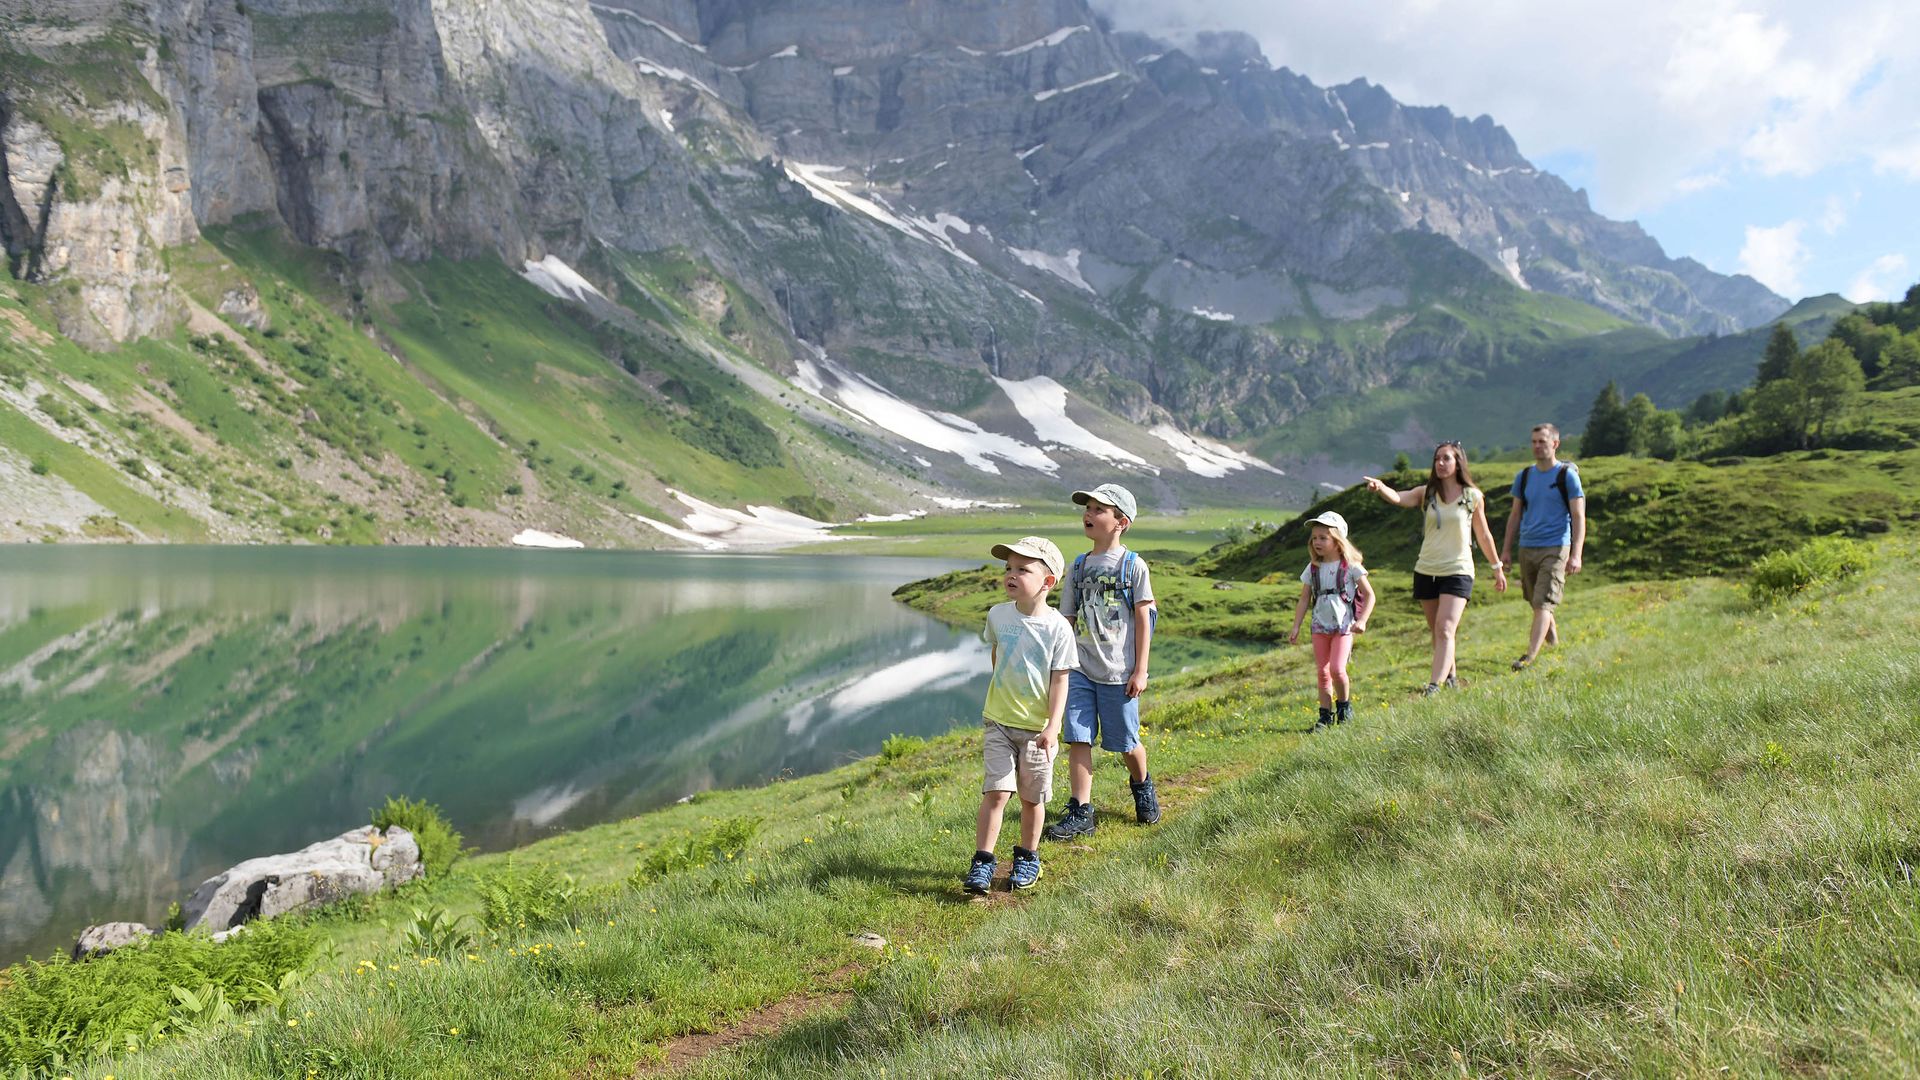 A family walks along the Oberblegisee on a mountain meadow.